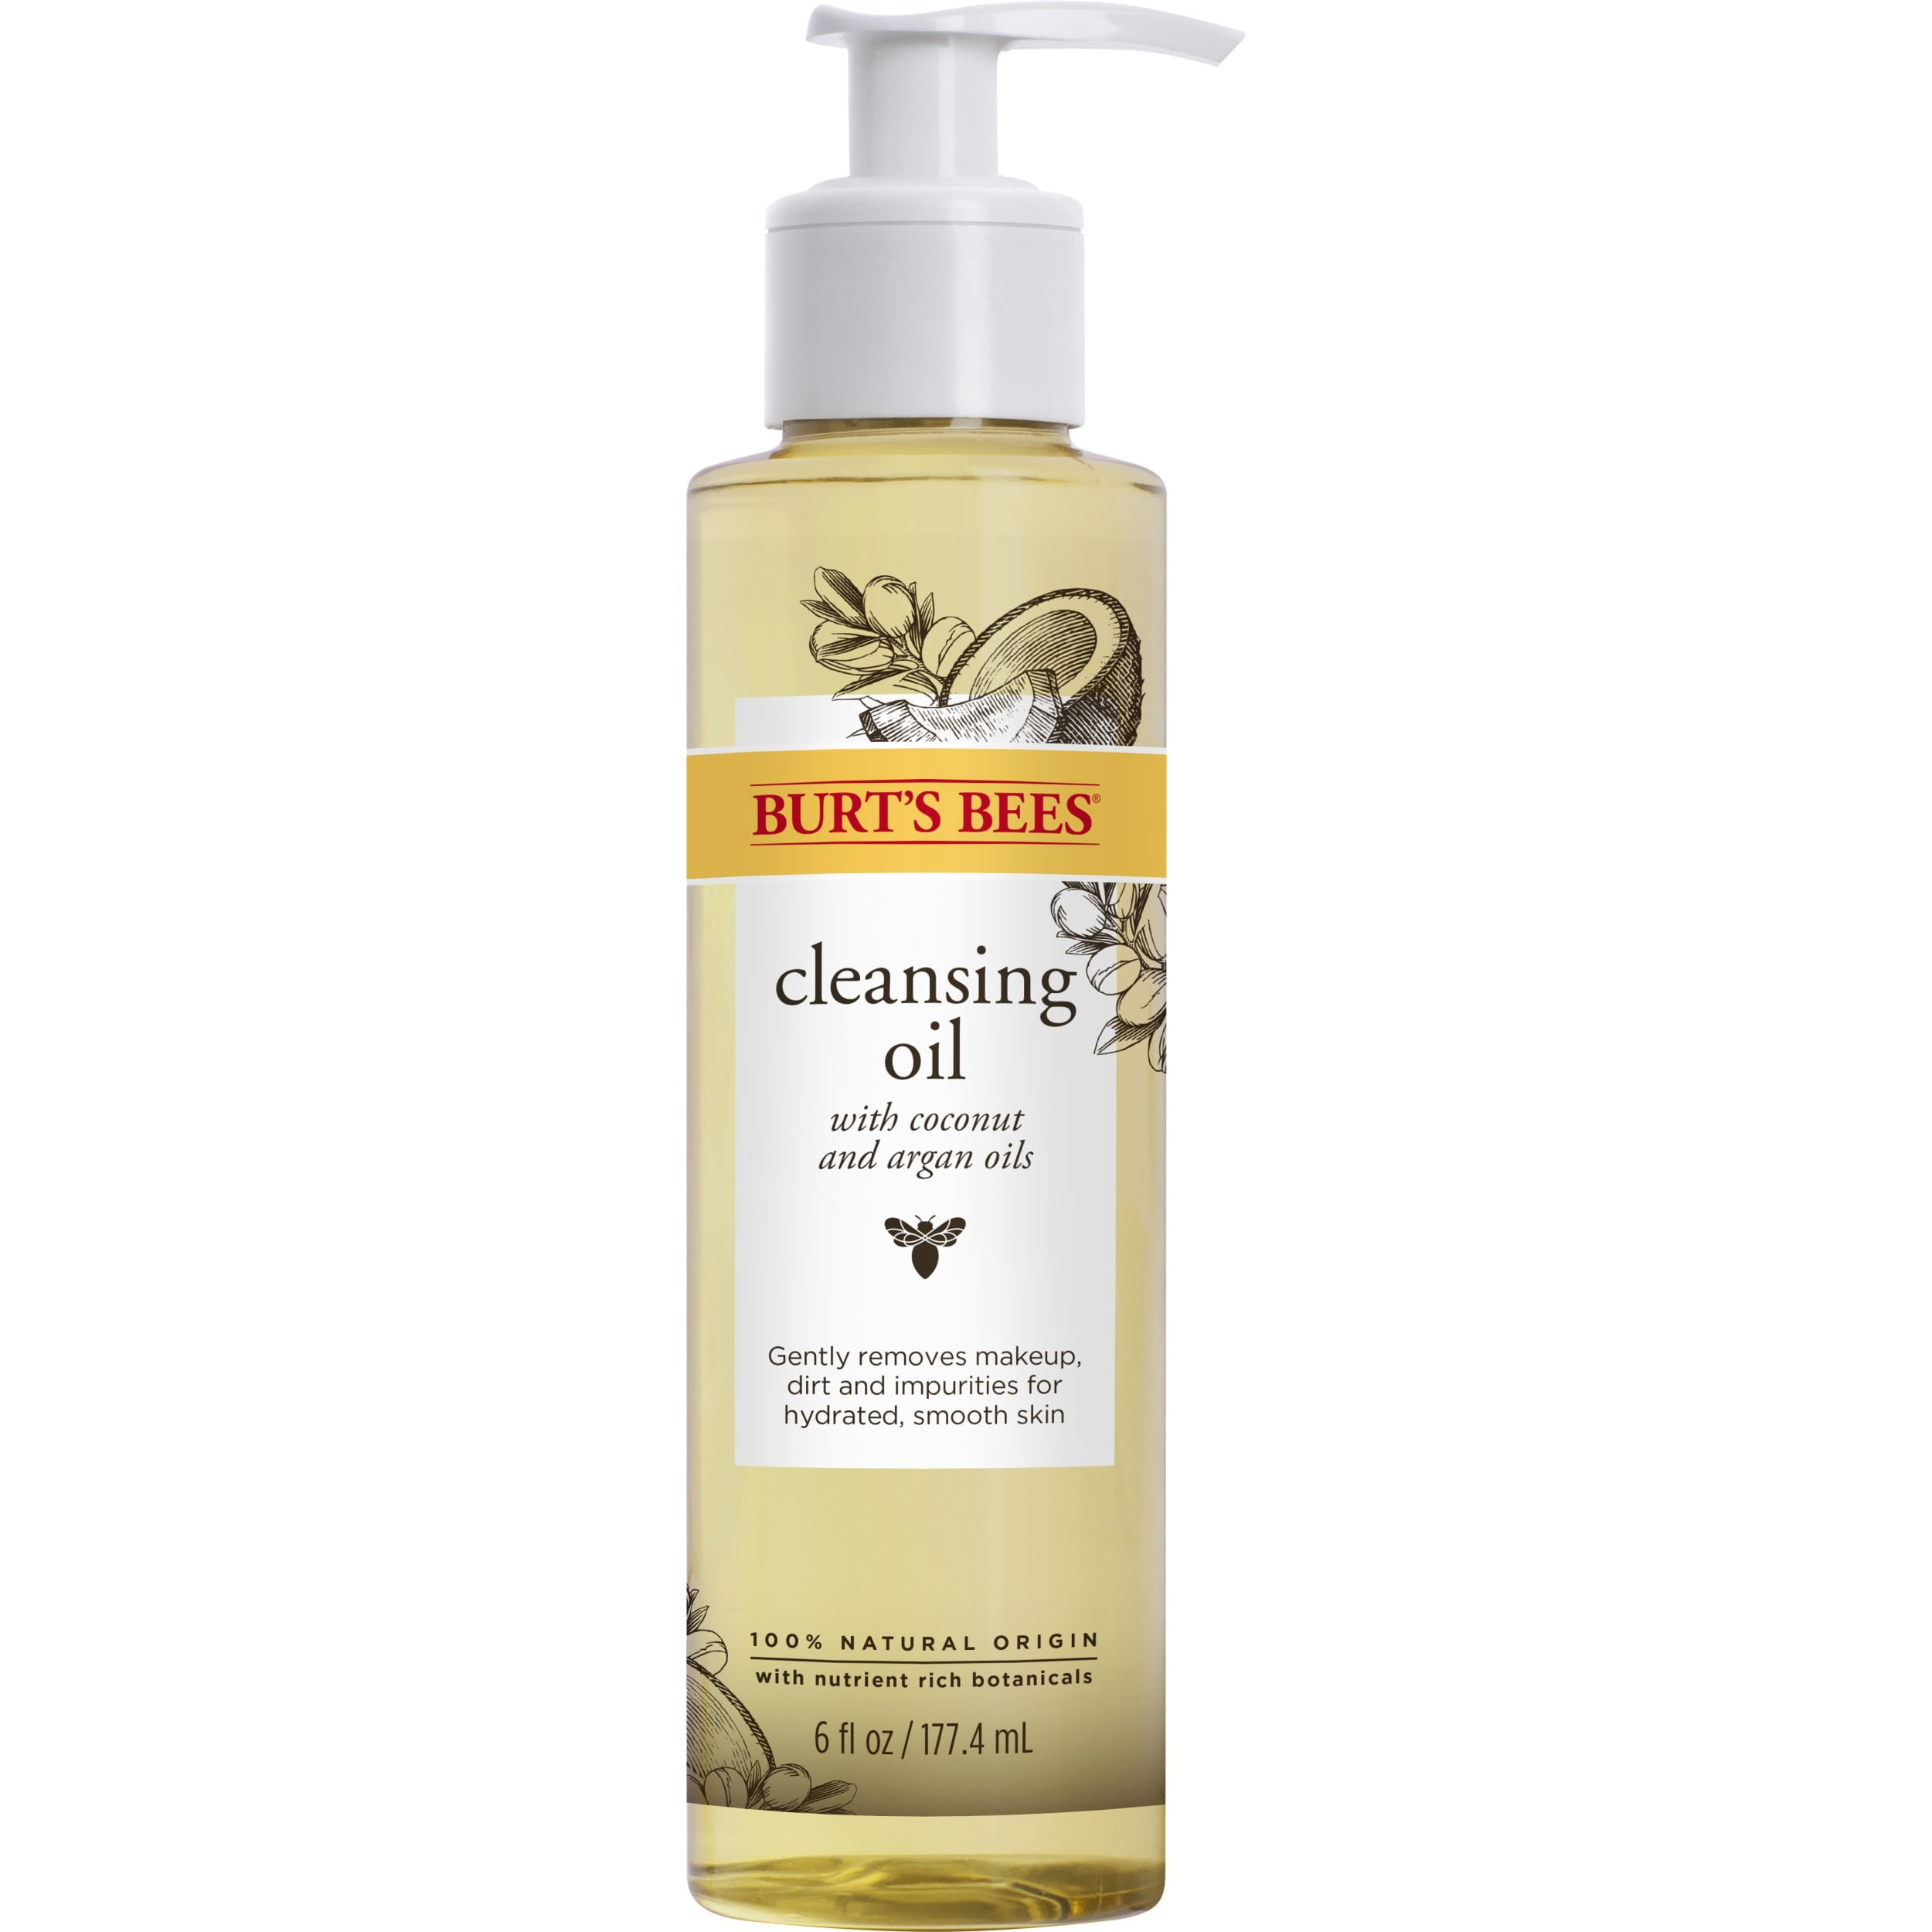 Burt's Bees Facial Cleansing Oil for Normal-Dry Skin, 6 fl oz